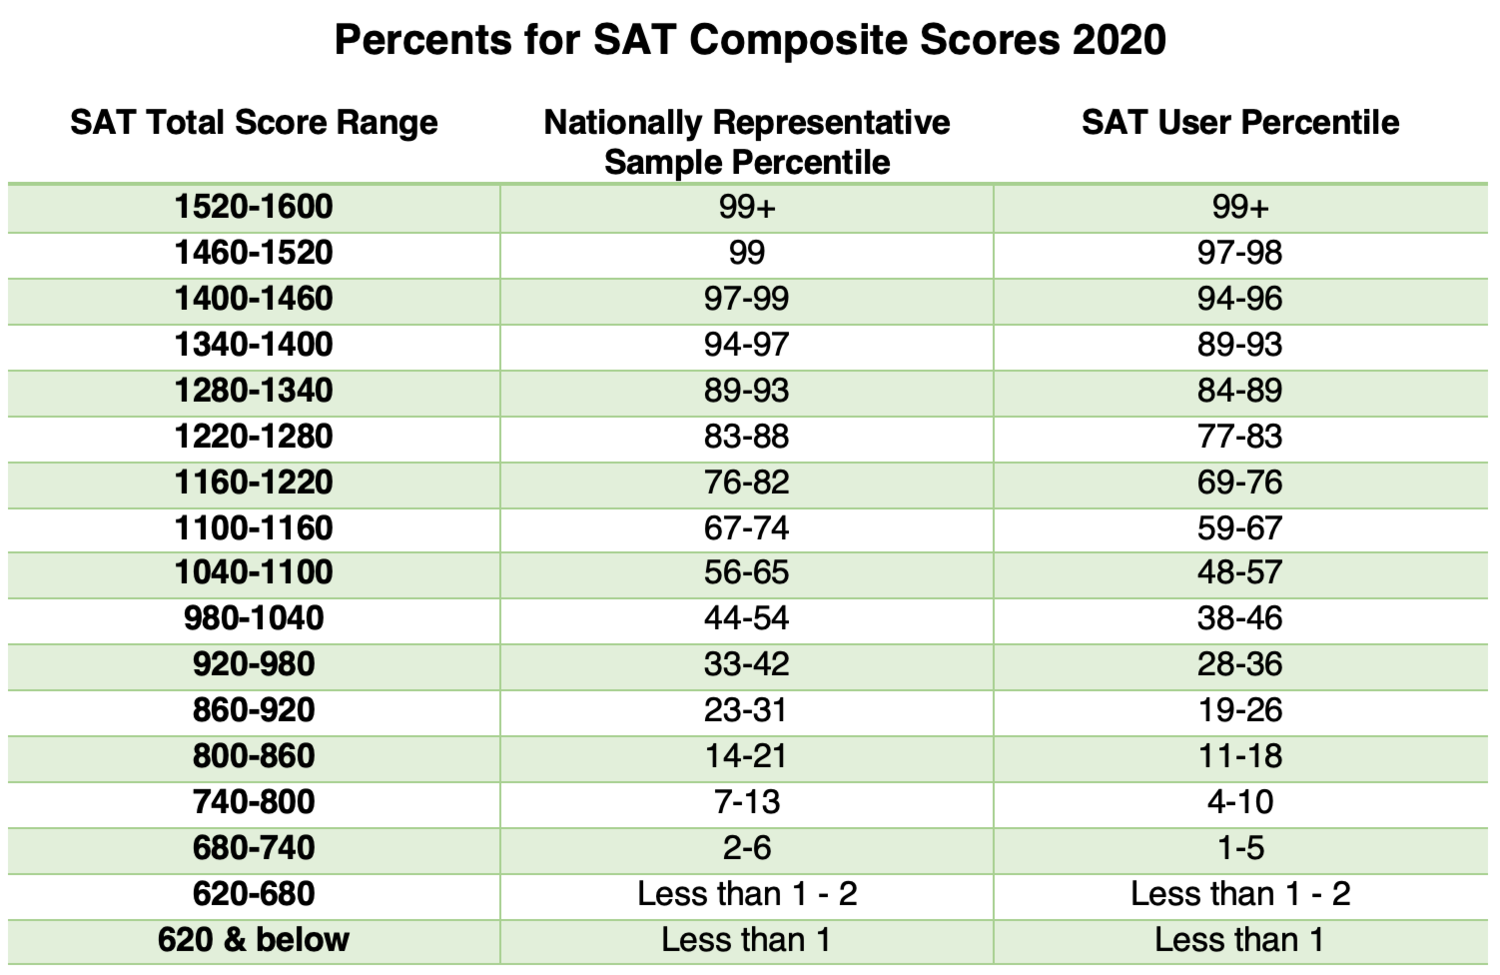 Table Sourced from SAT 2020 Scoring Data